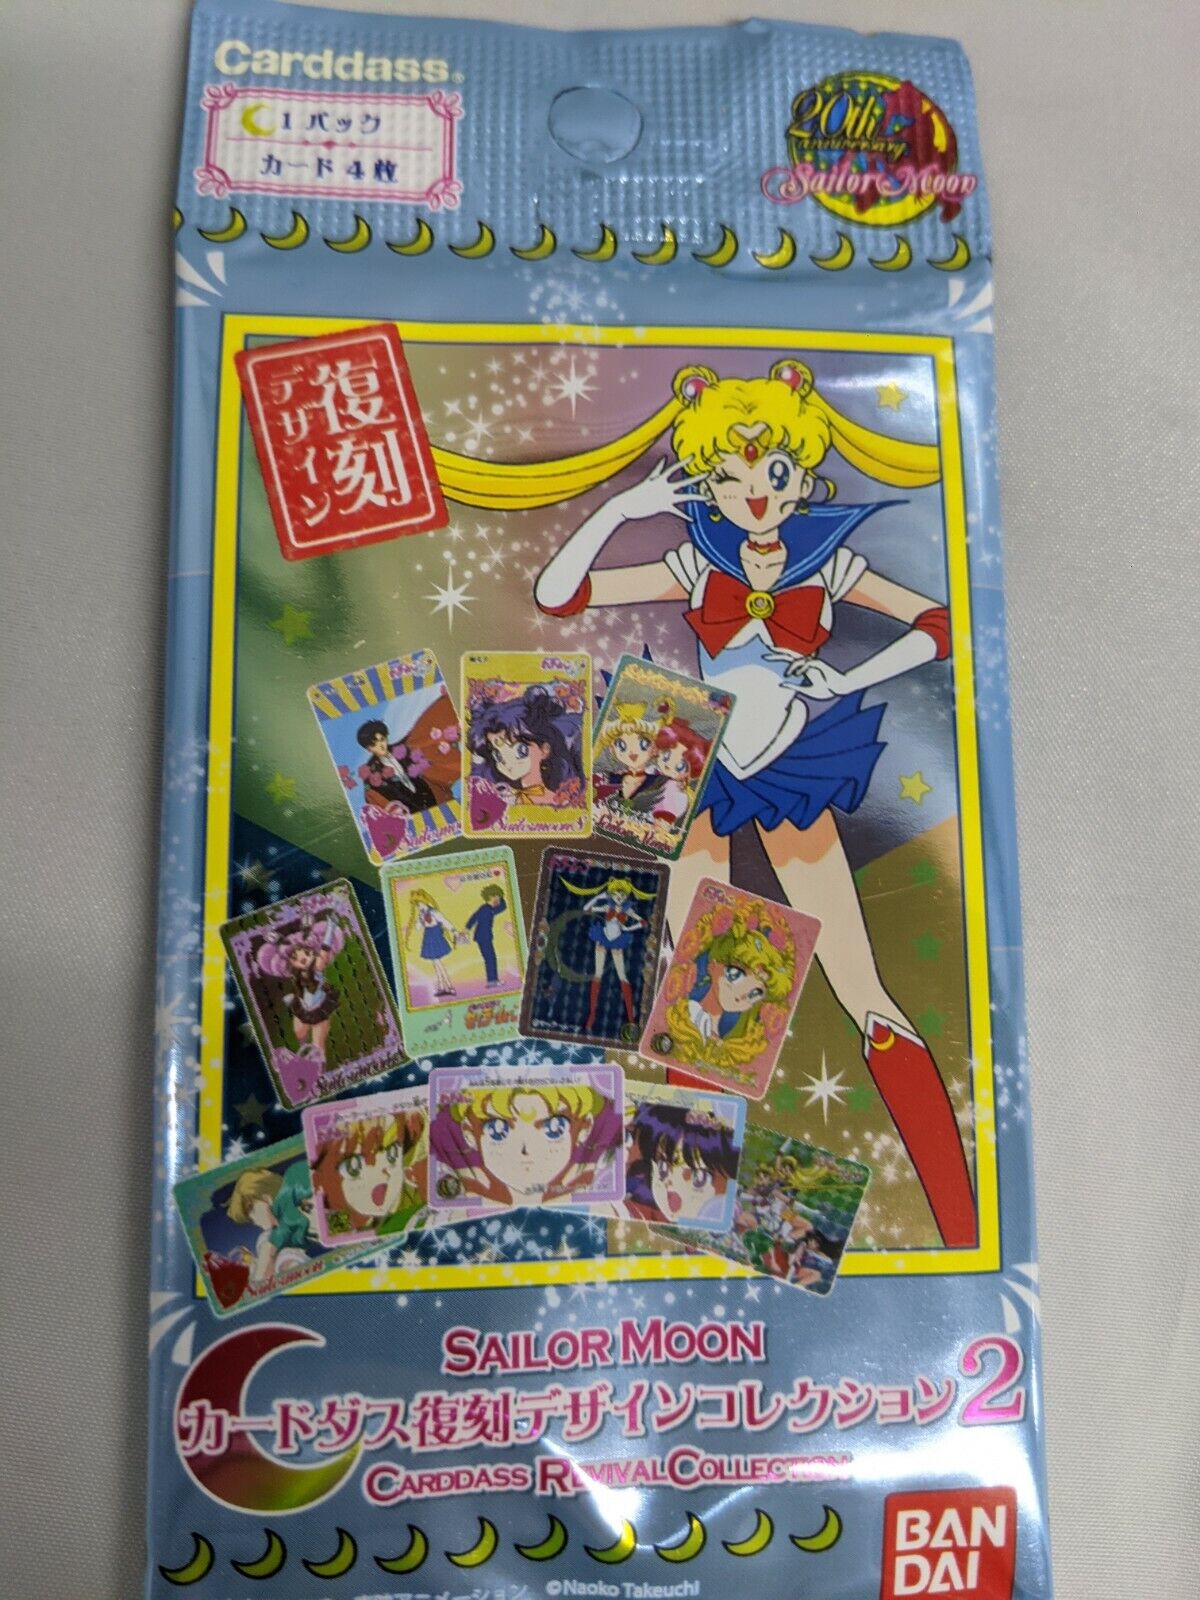 Sailor Moon 20th Anniversary trading cards carddass rivival collection 2 -Bandai